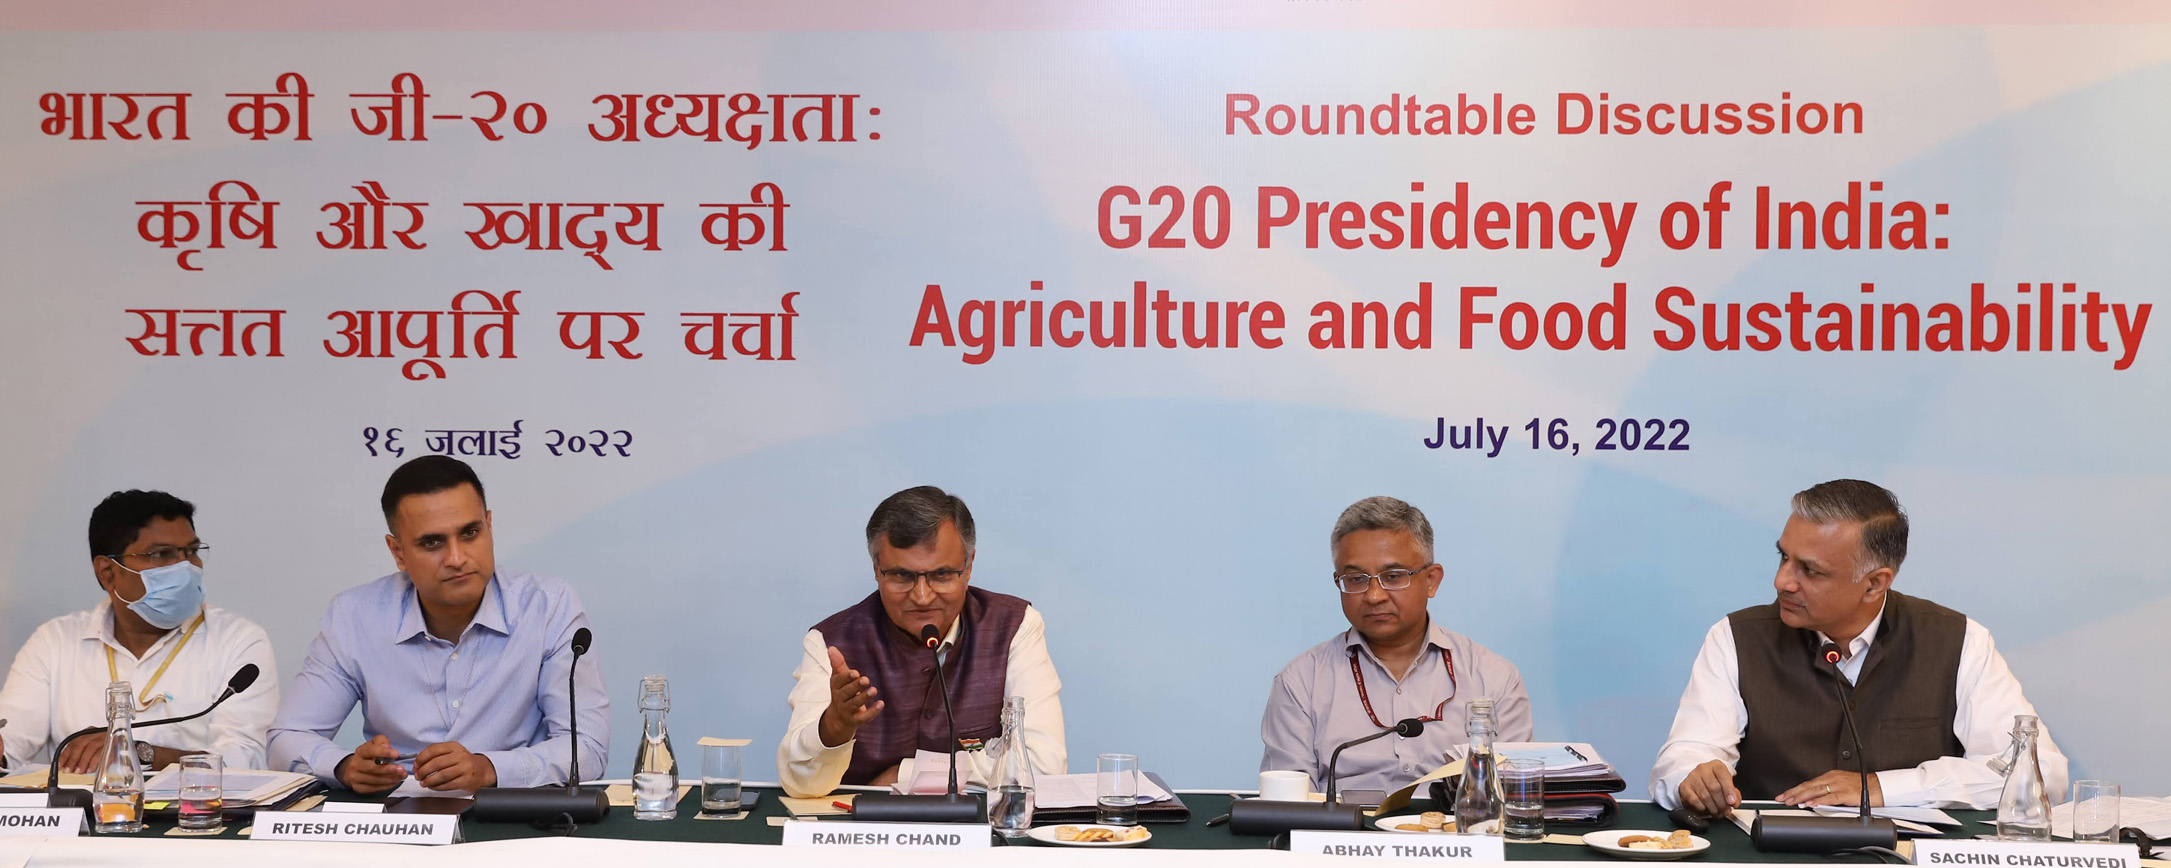 Roundtable Discussion G20 Presidency of India: Agriculture and Food Sustainability